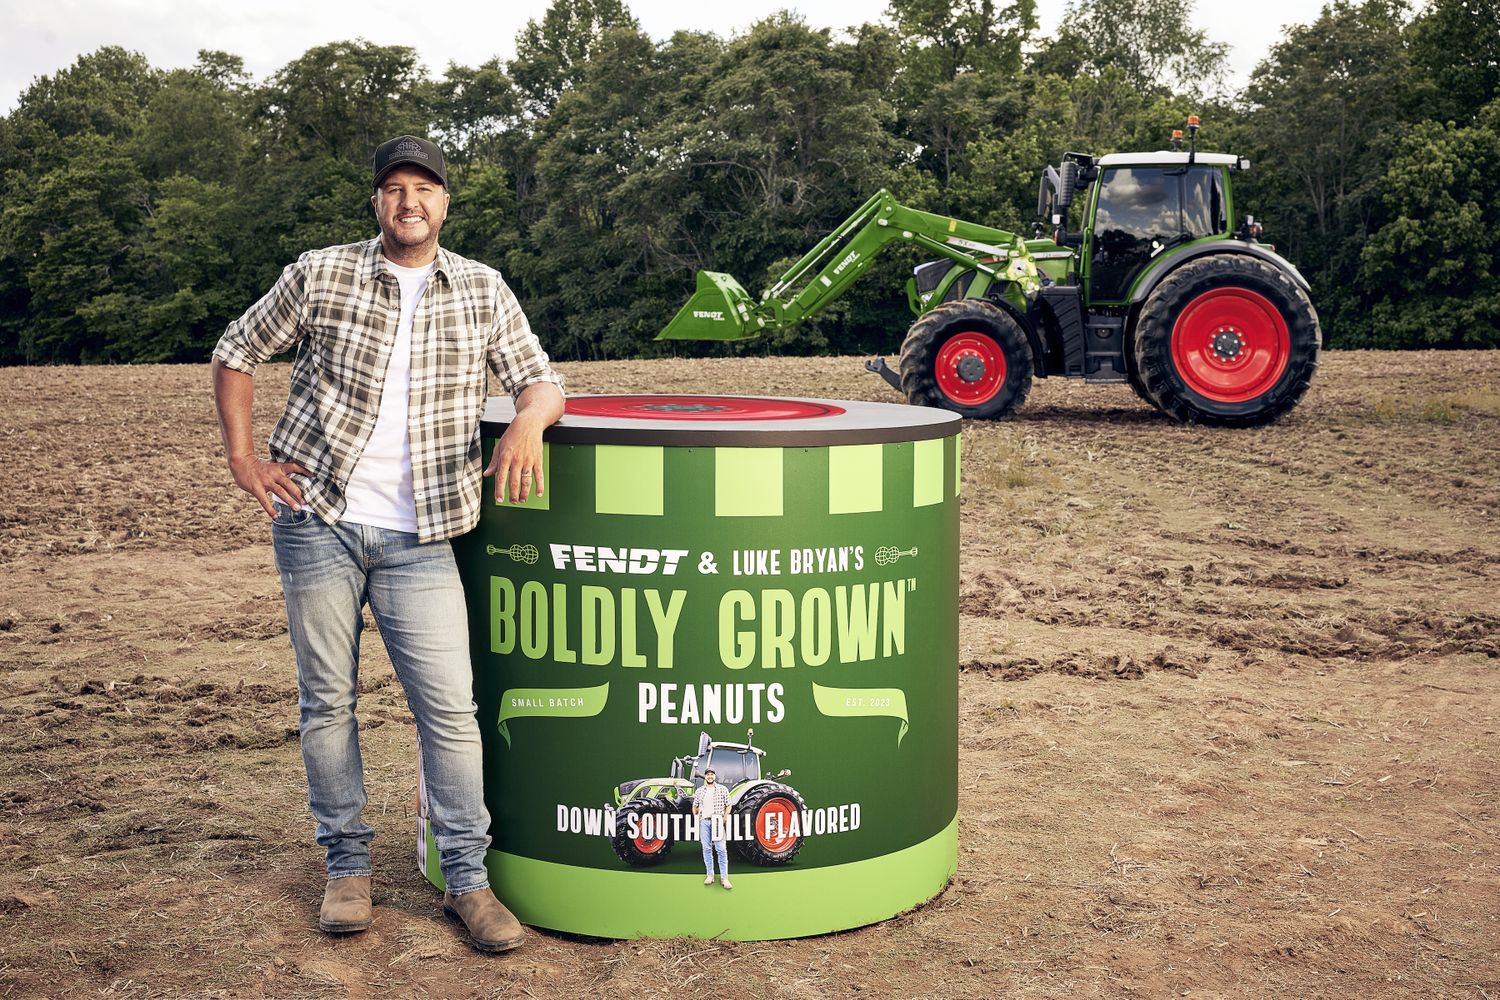 AGCO's Fendt and Luke Bryan Collaborate to Harvest Limited-Edition Peanuts and Support the National FFA Organization